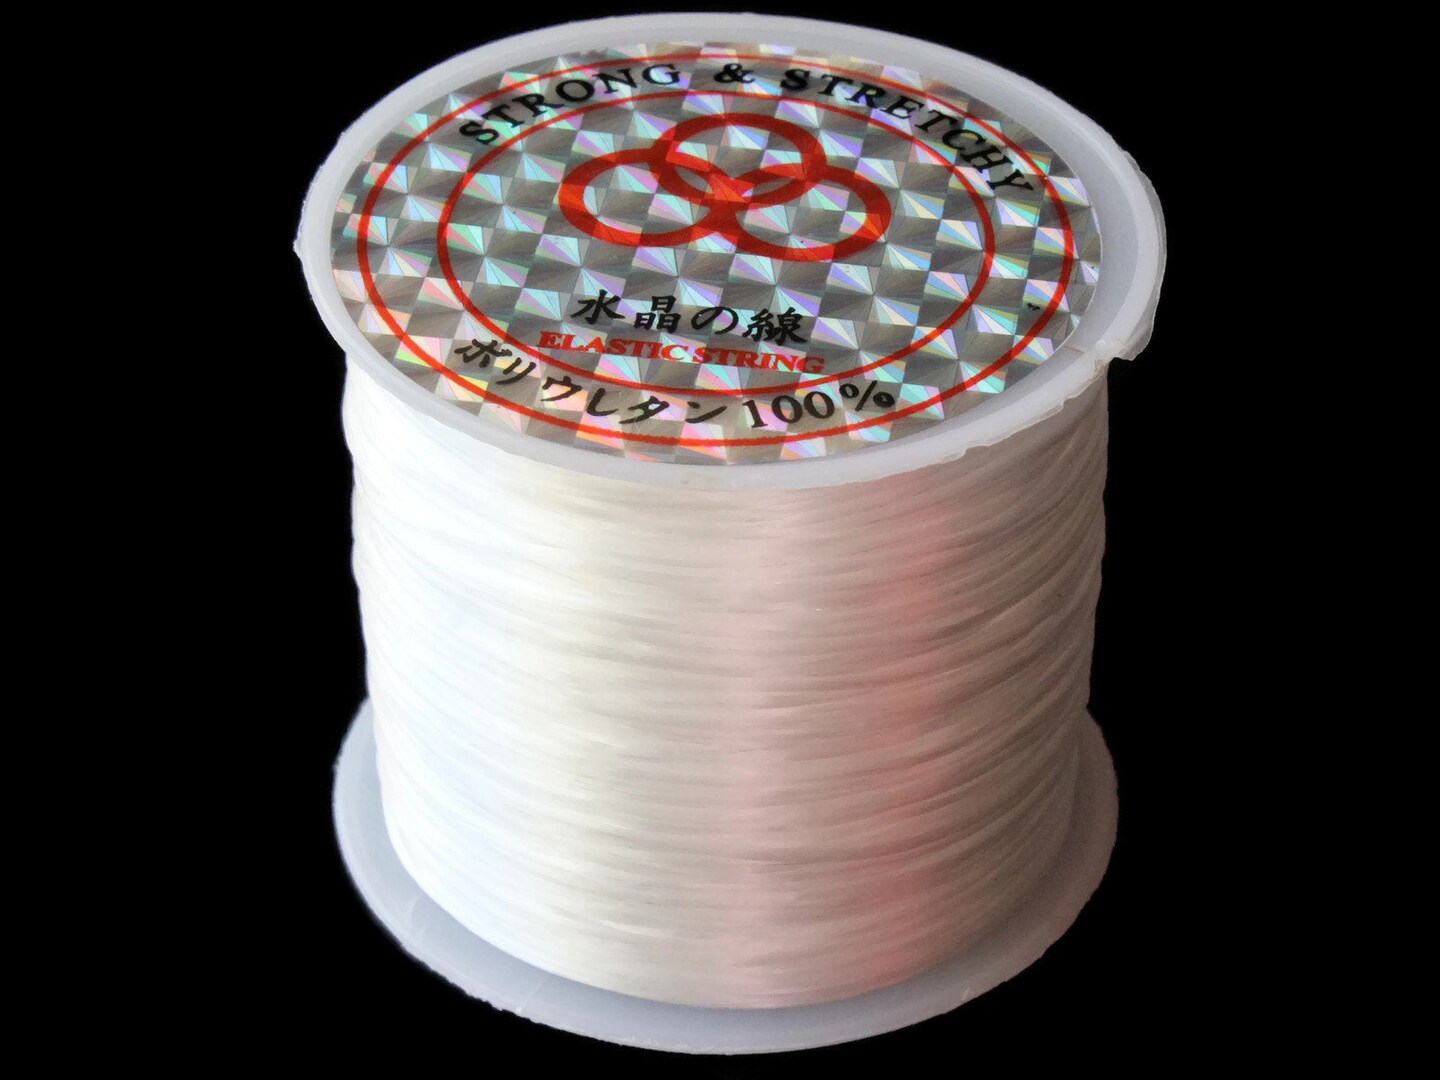 196 Feet Stretchy Cord 0.8mm White Elastic Thread 60 Meters per roll of  String bH3